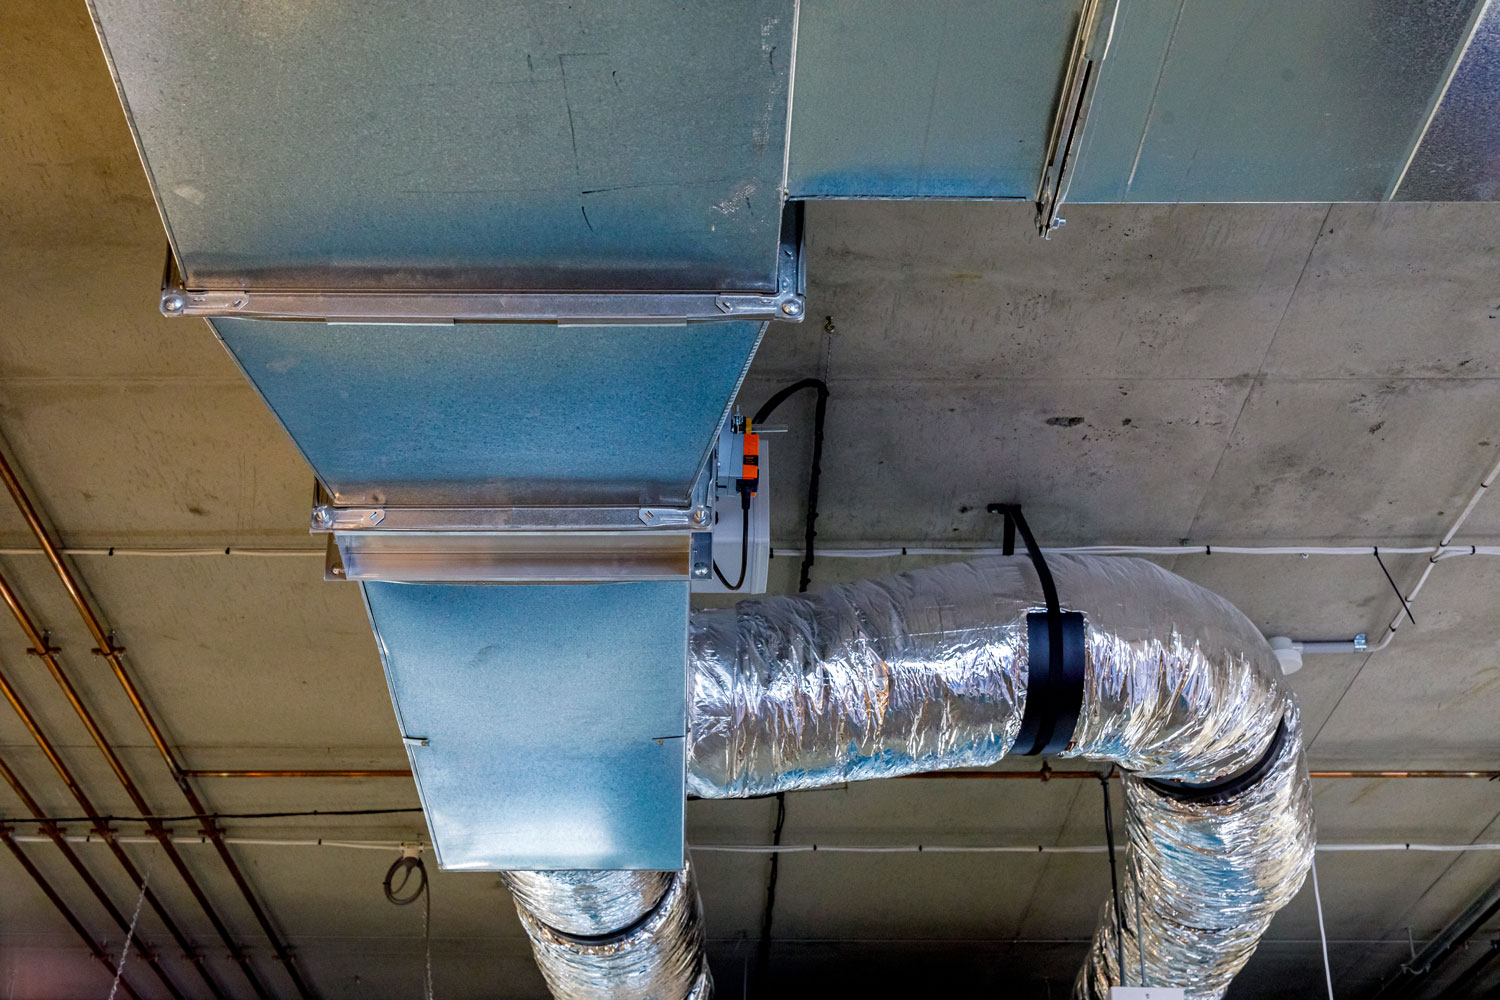 Ducting's for a furnace or for a humidifier